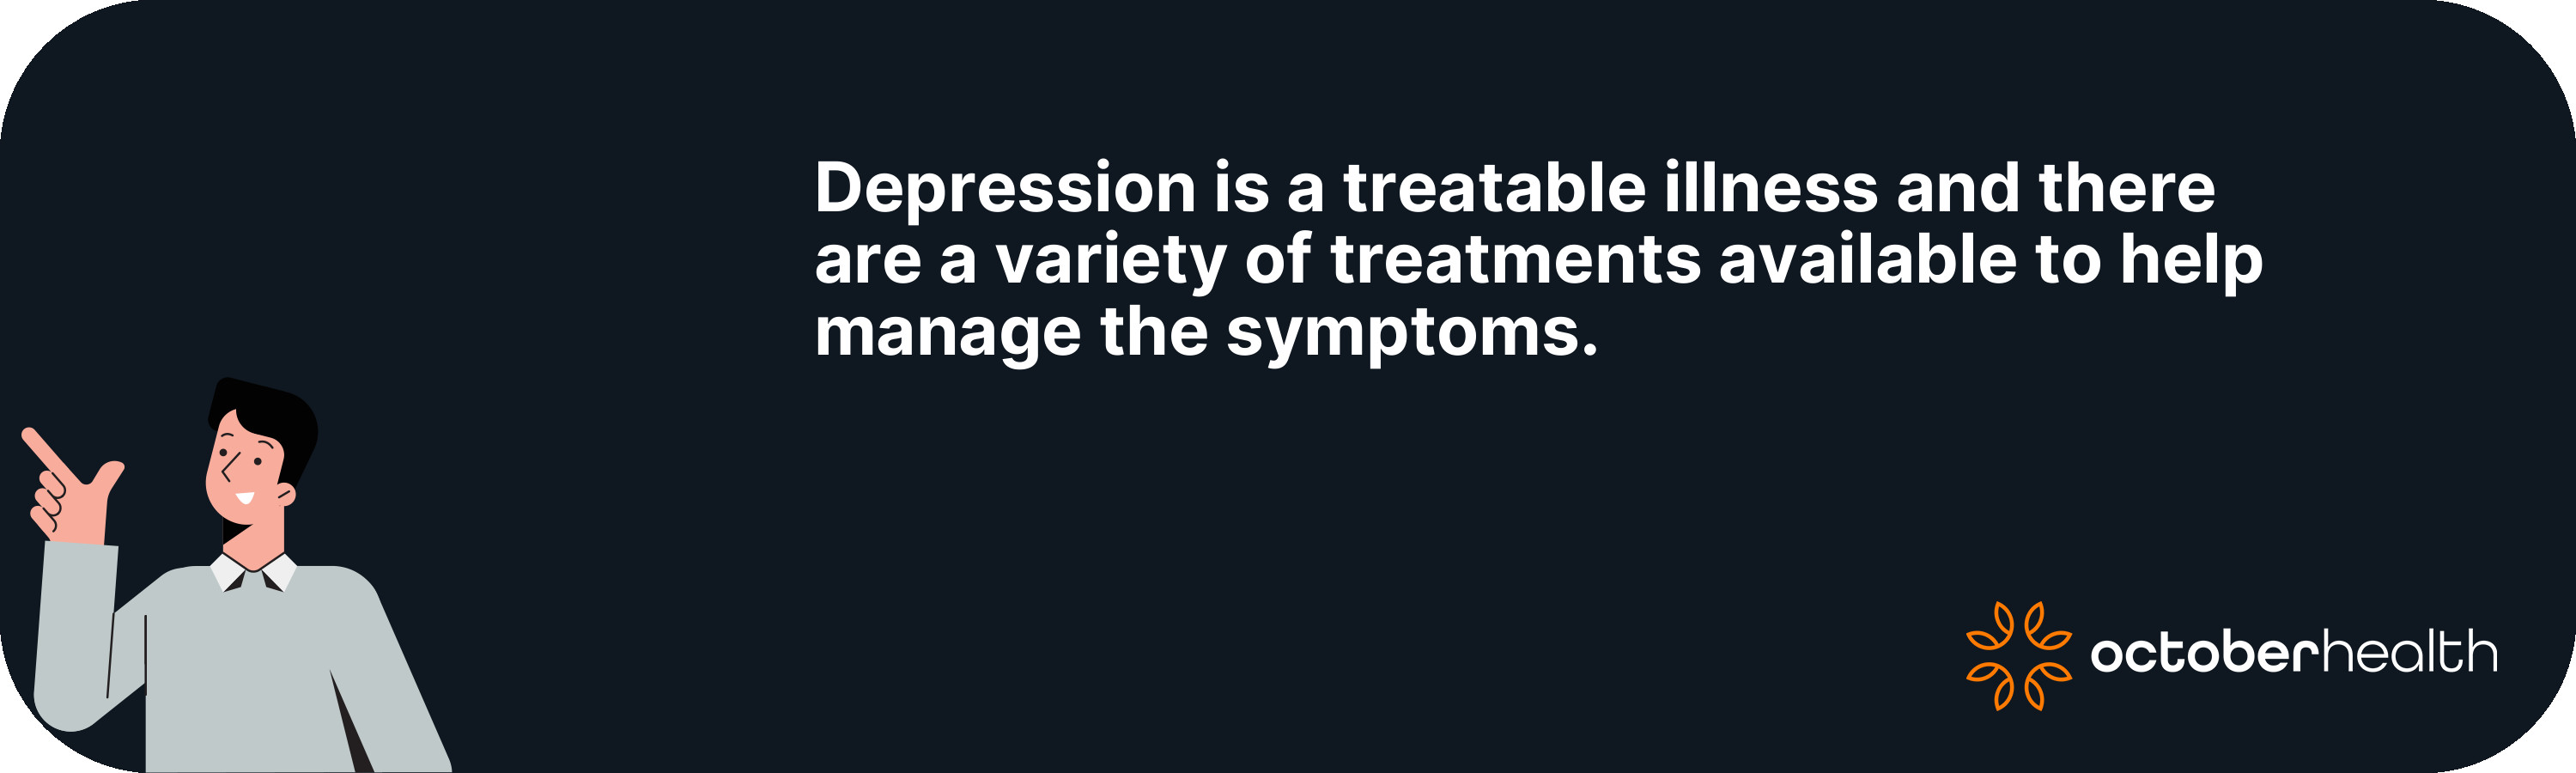 Depression is a treatable illness and...